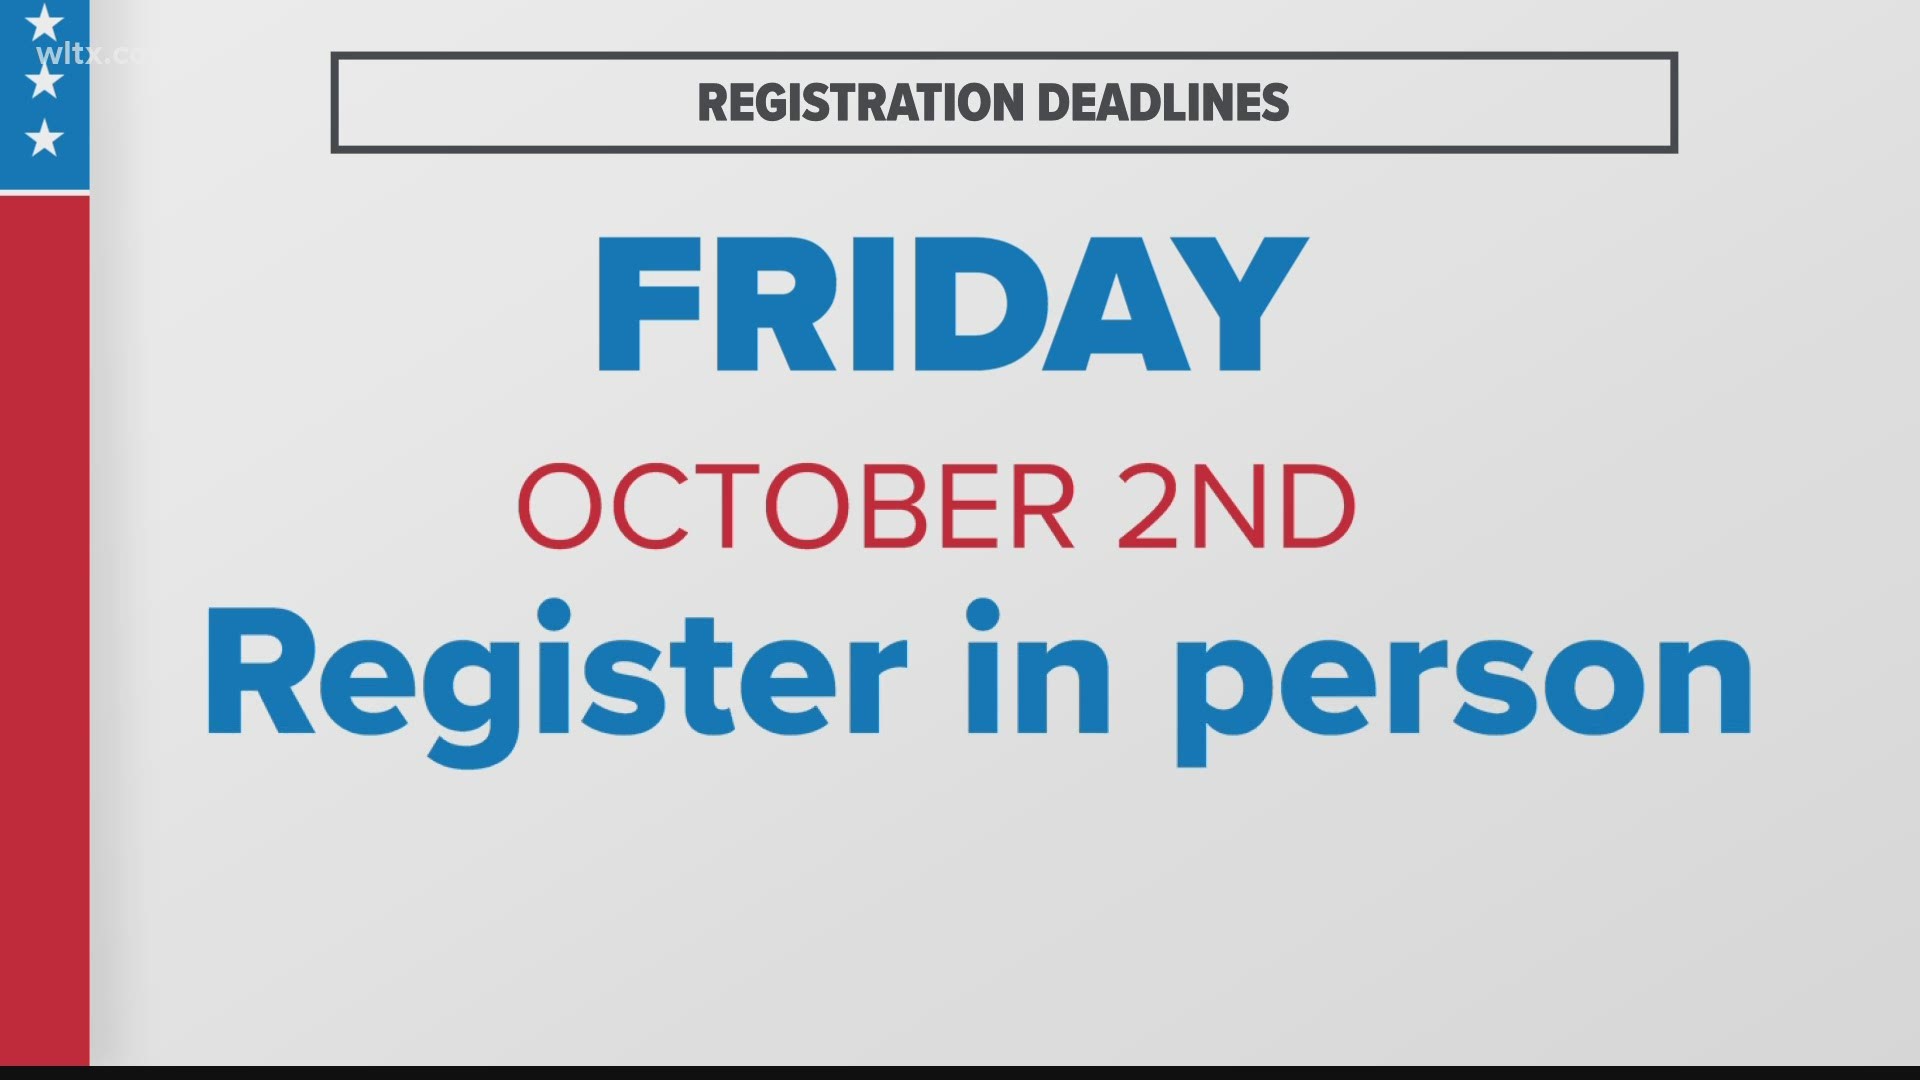 Have you registered to vote? If not, the deadlines to register in South Carolina are just a few short days away.